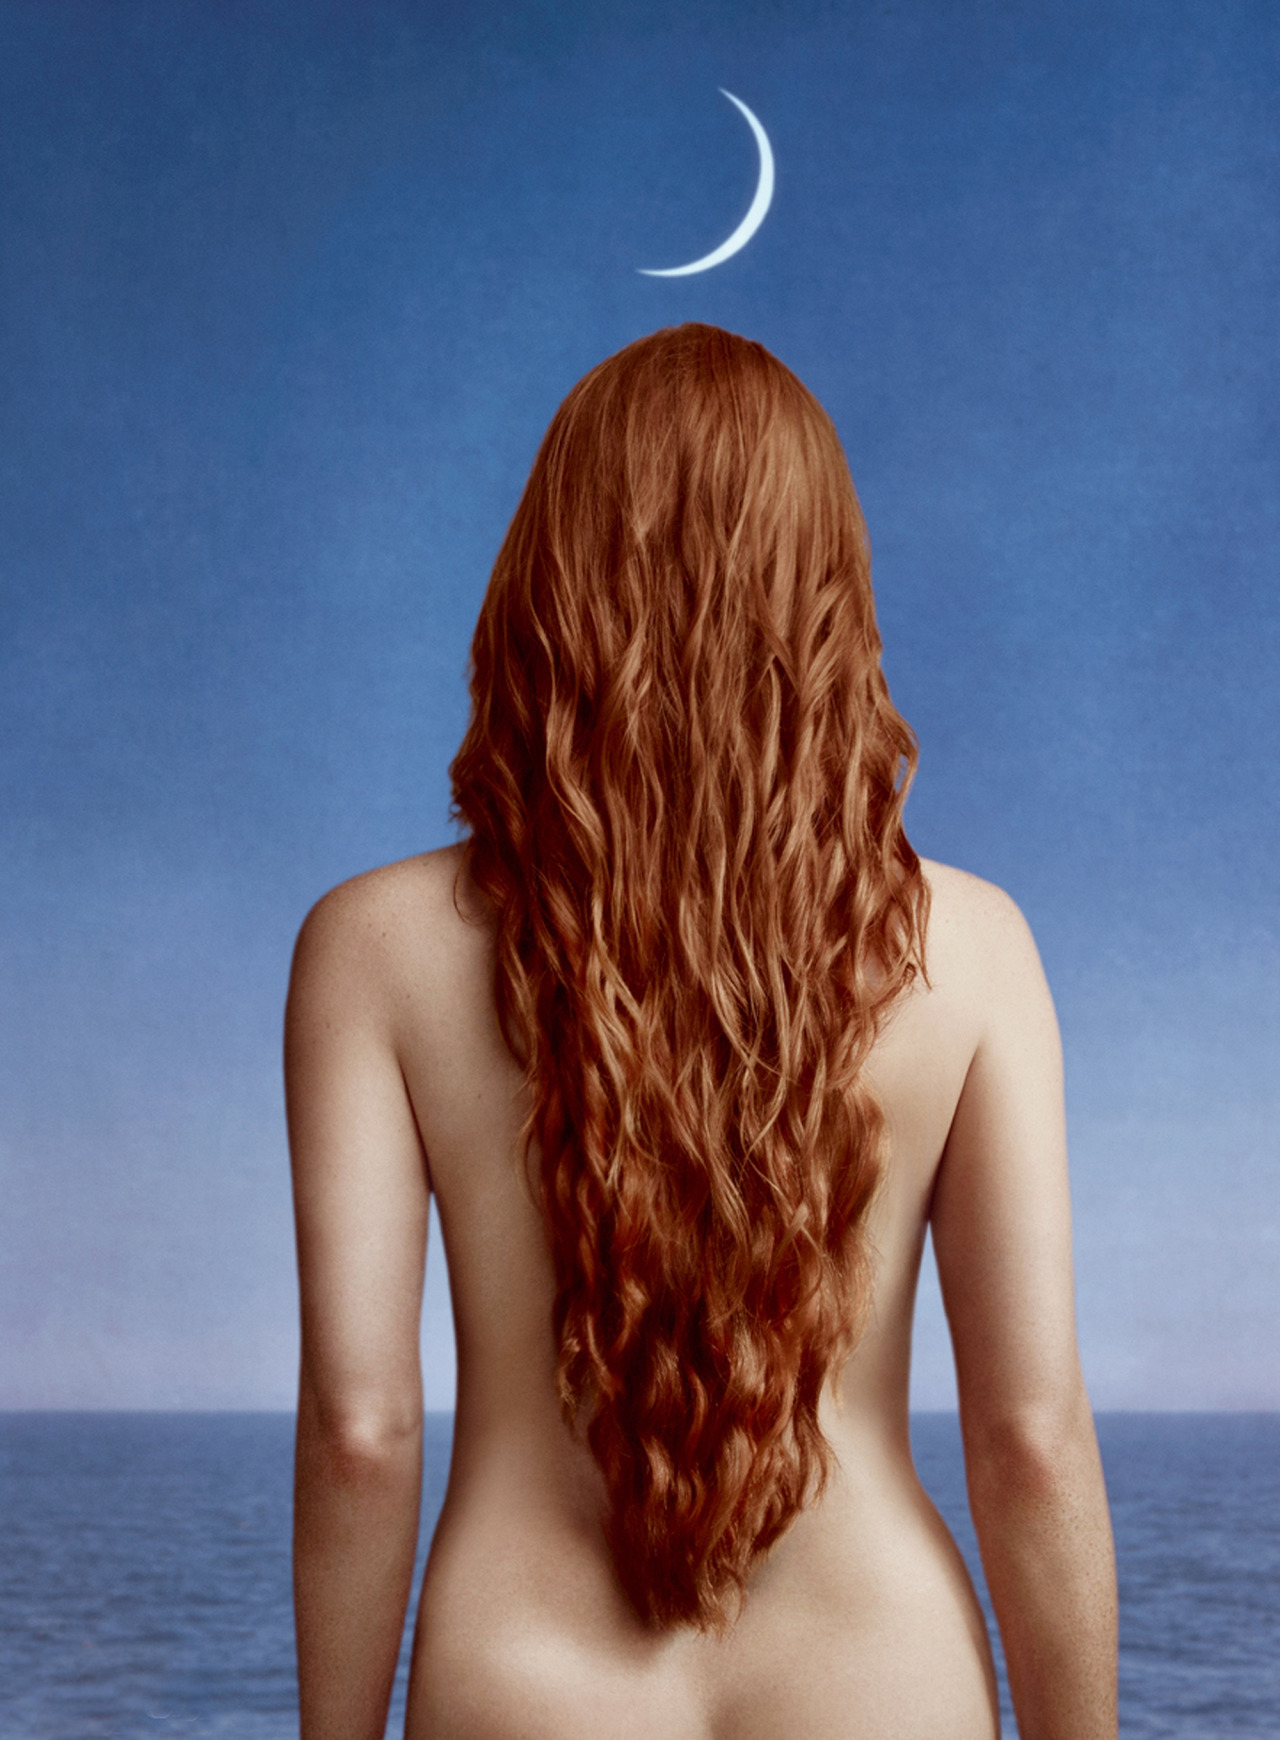 andreasanterini:
“Jessica Chastain / Photographed by Annie Leibovitz / For Vogue US December 2013 / inspired by “La Robe du Soir” by René Magritte 1955
”